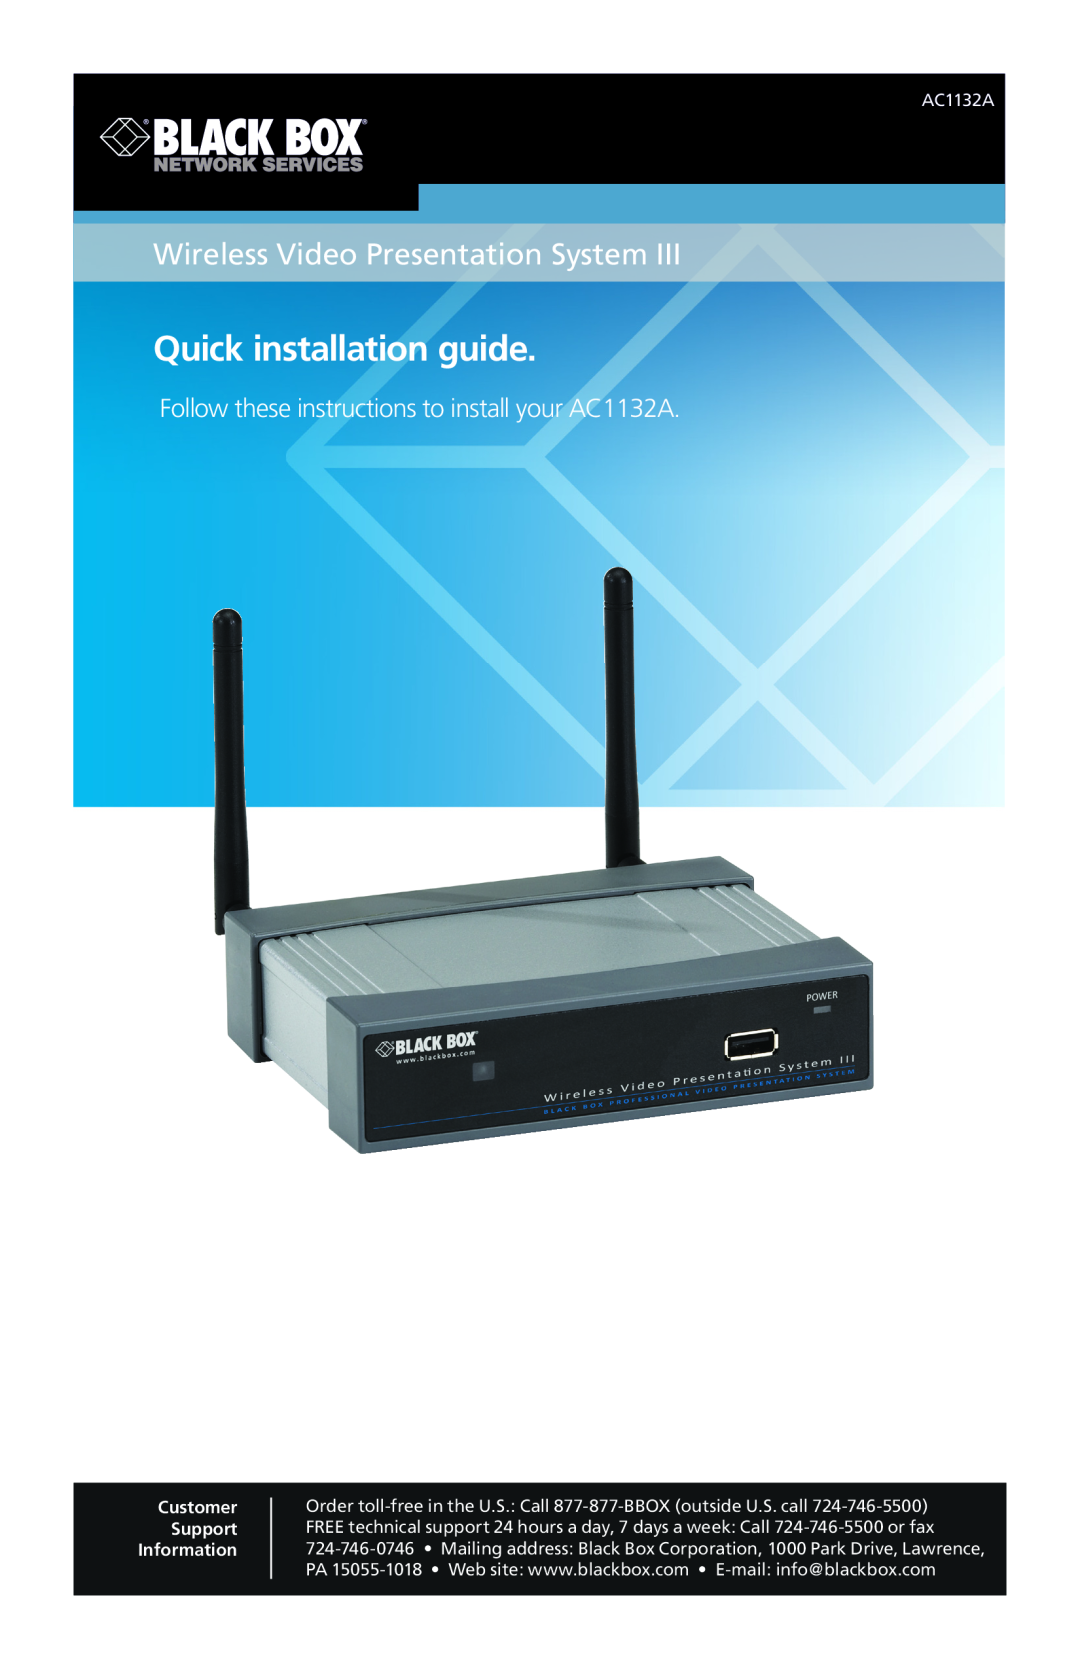 Black Box AC1132A manual Wireless Video Presentation System, Quick installation guide, Customer Support Information 